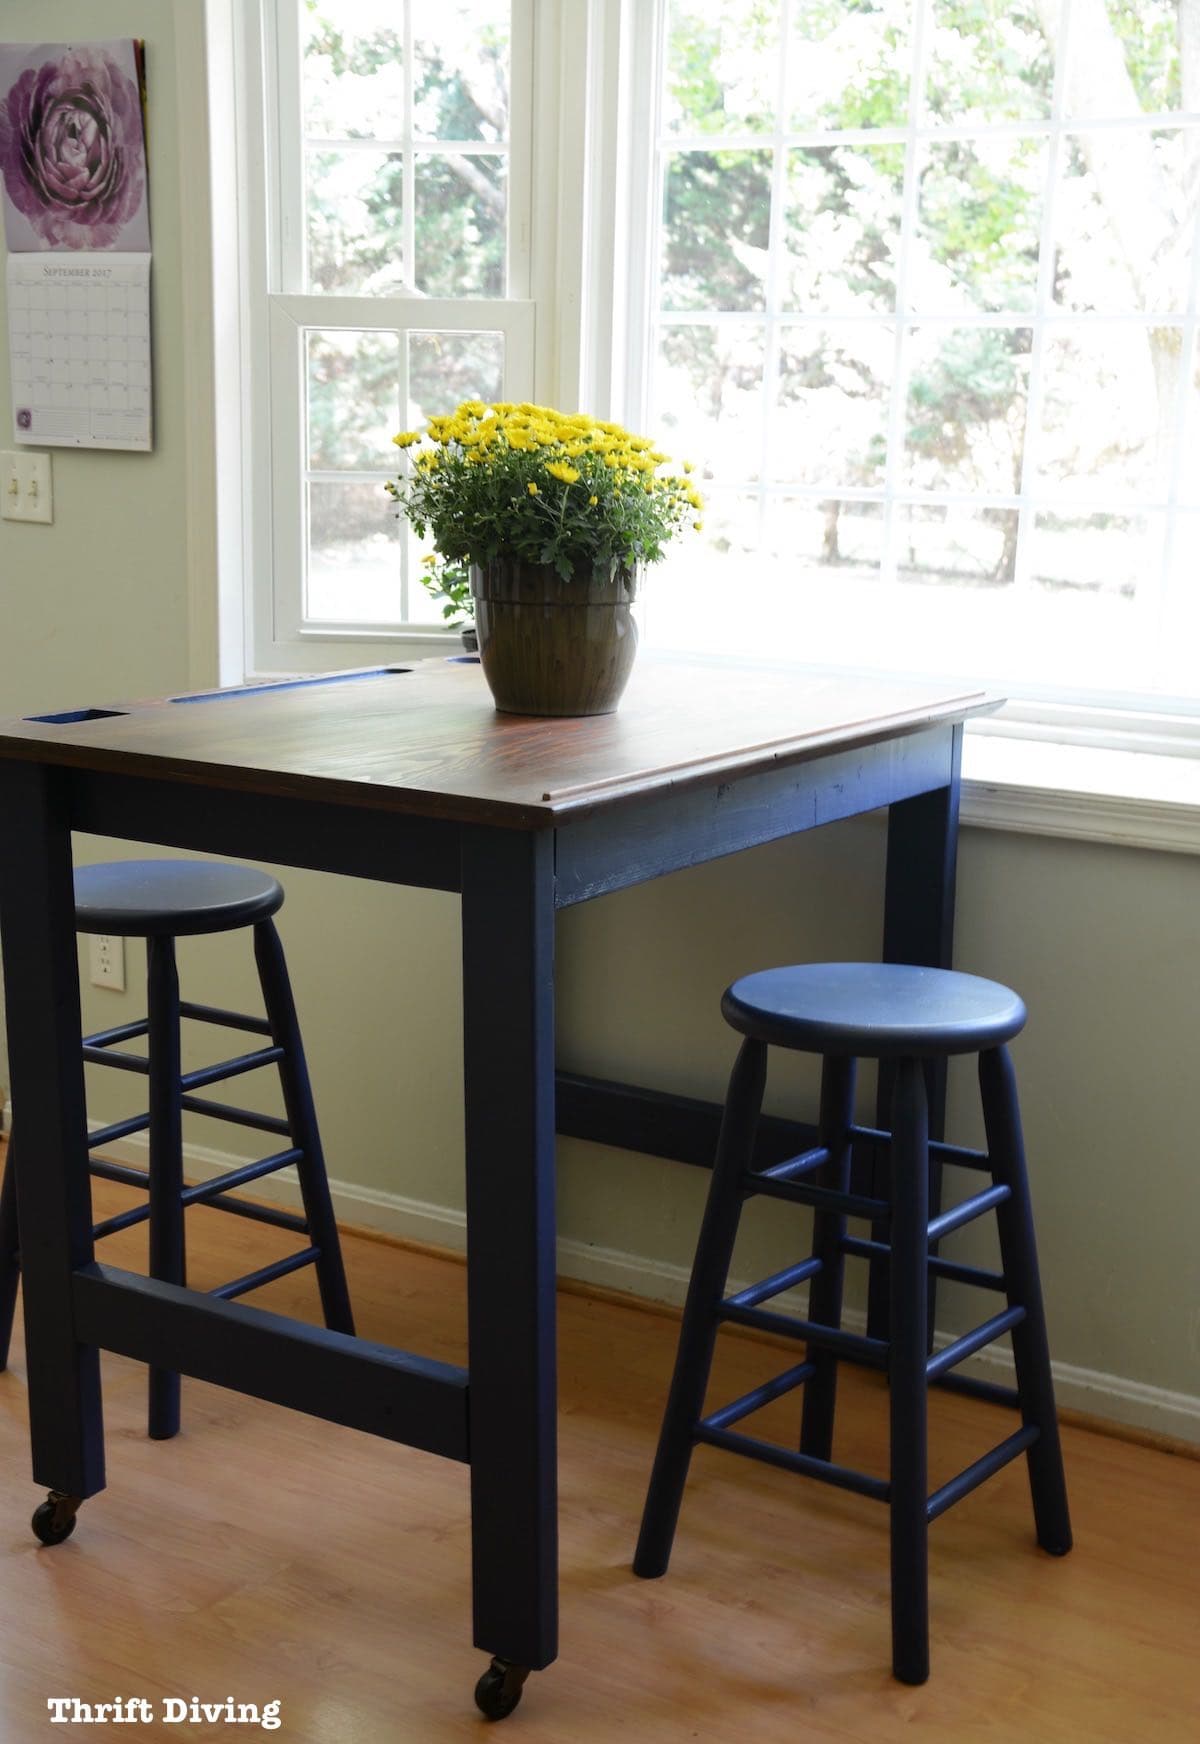 BEFORE & AFTER: Make your own DIY eat-in kitchen table in a Navy blue paint and refinished kitchen table top! | Thrift Diving Blog - See over 500 post and projects on the blog!